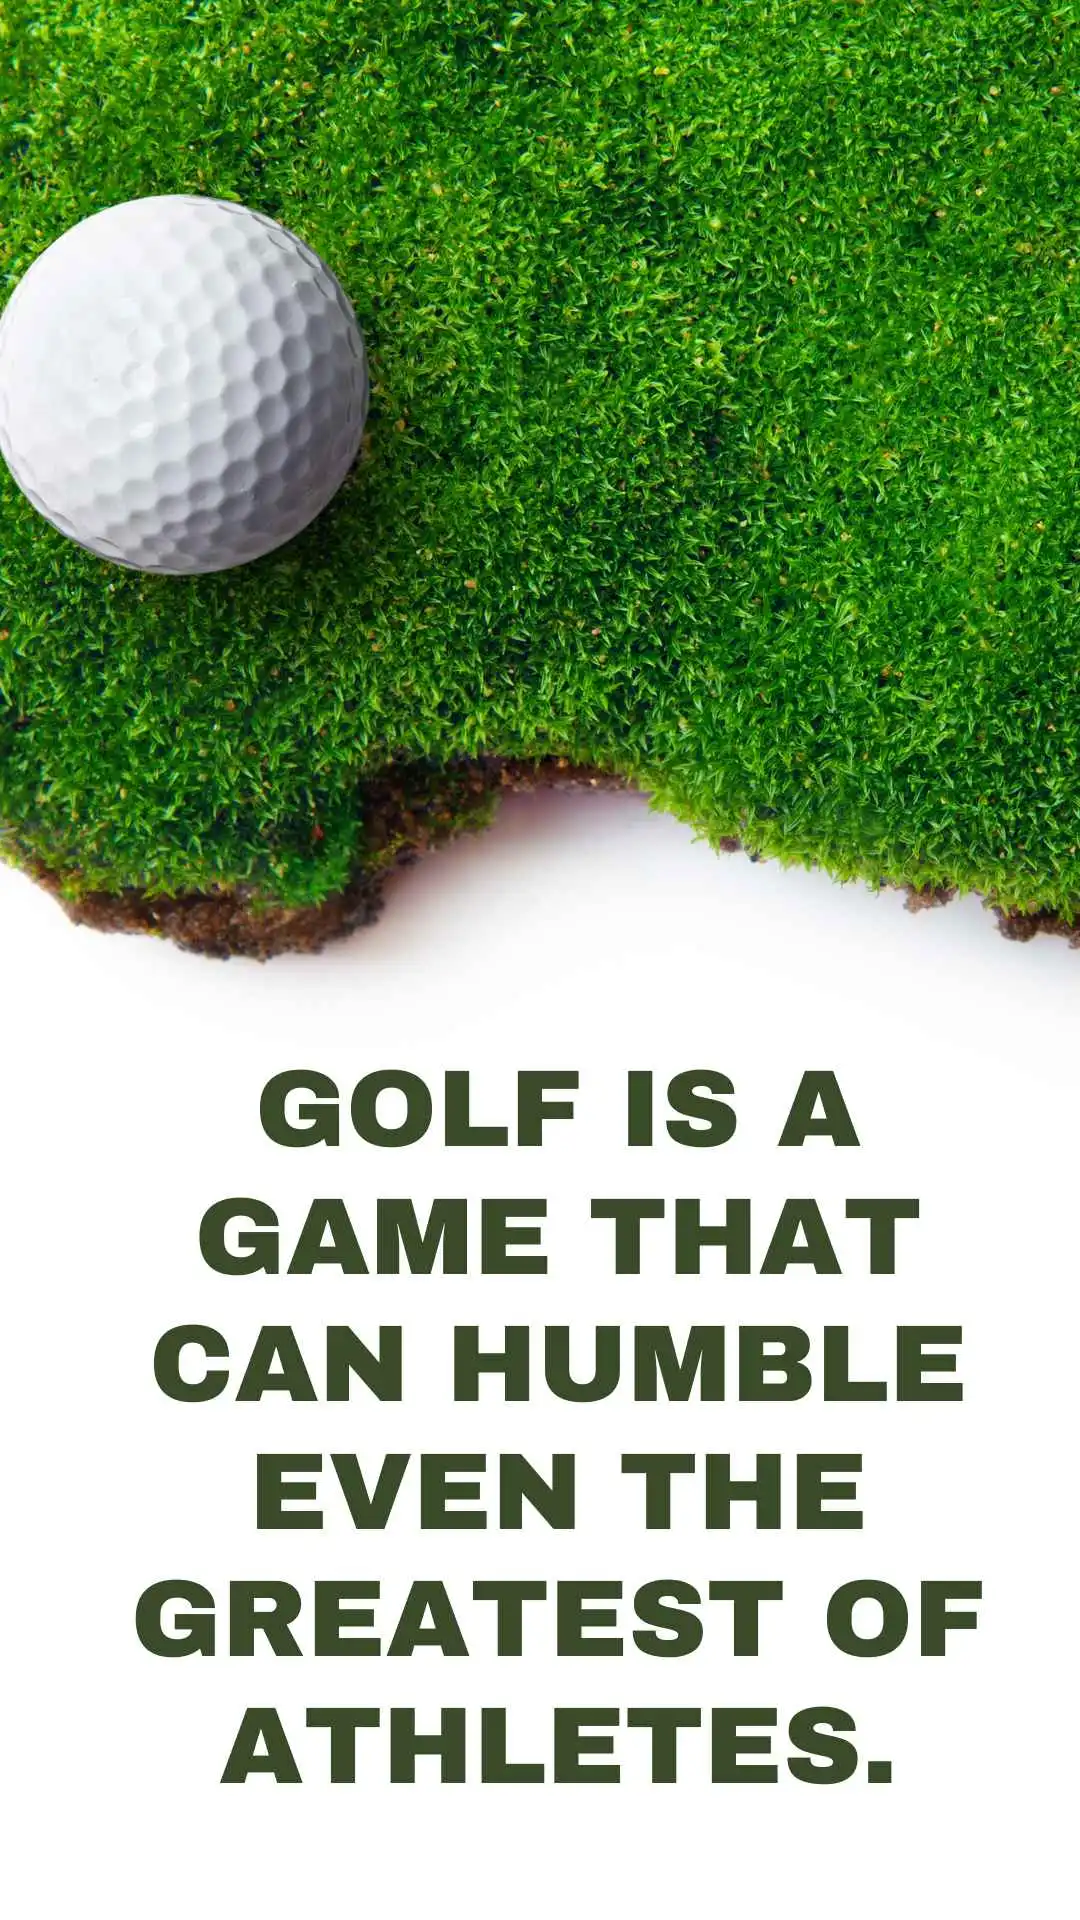 Golf is a game that can humble even the greatest of athletes.